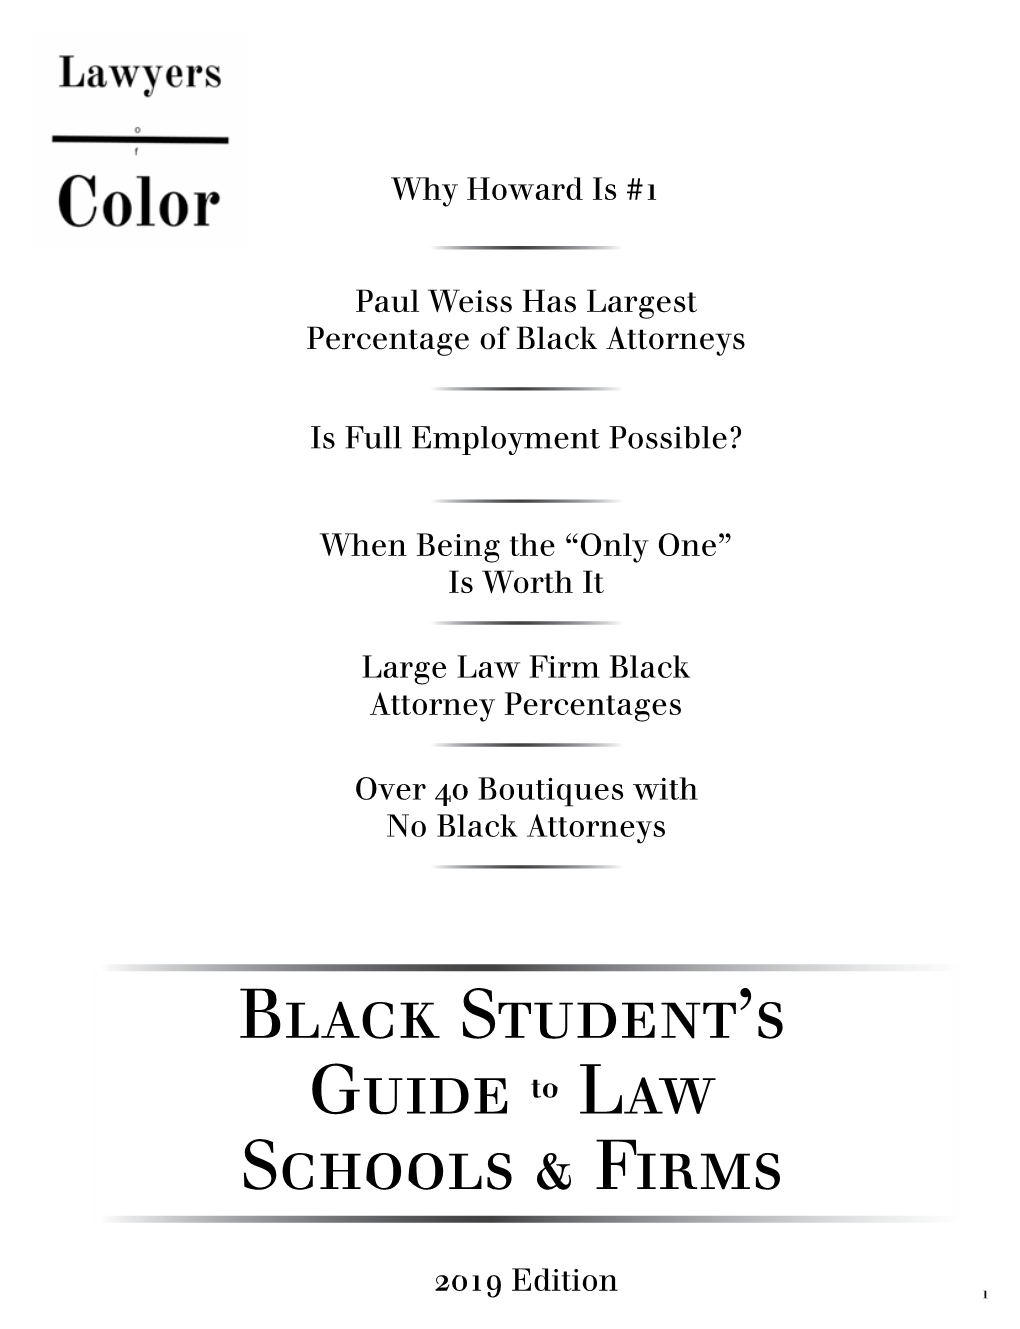 Black Student's Guide to Law Schools & Firms